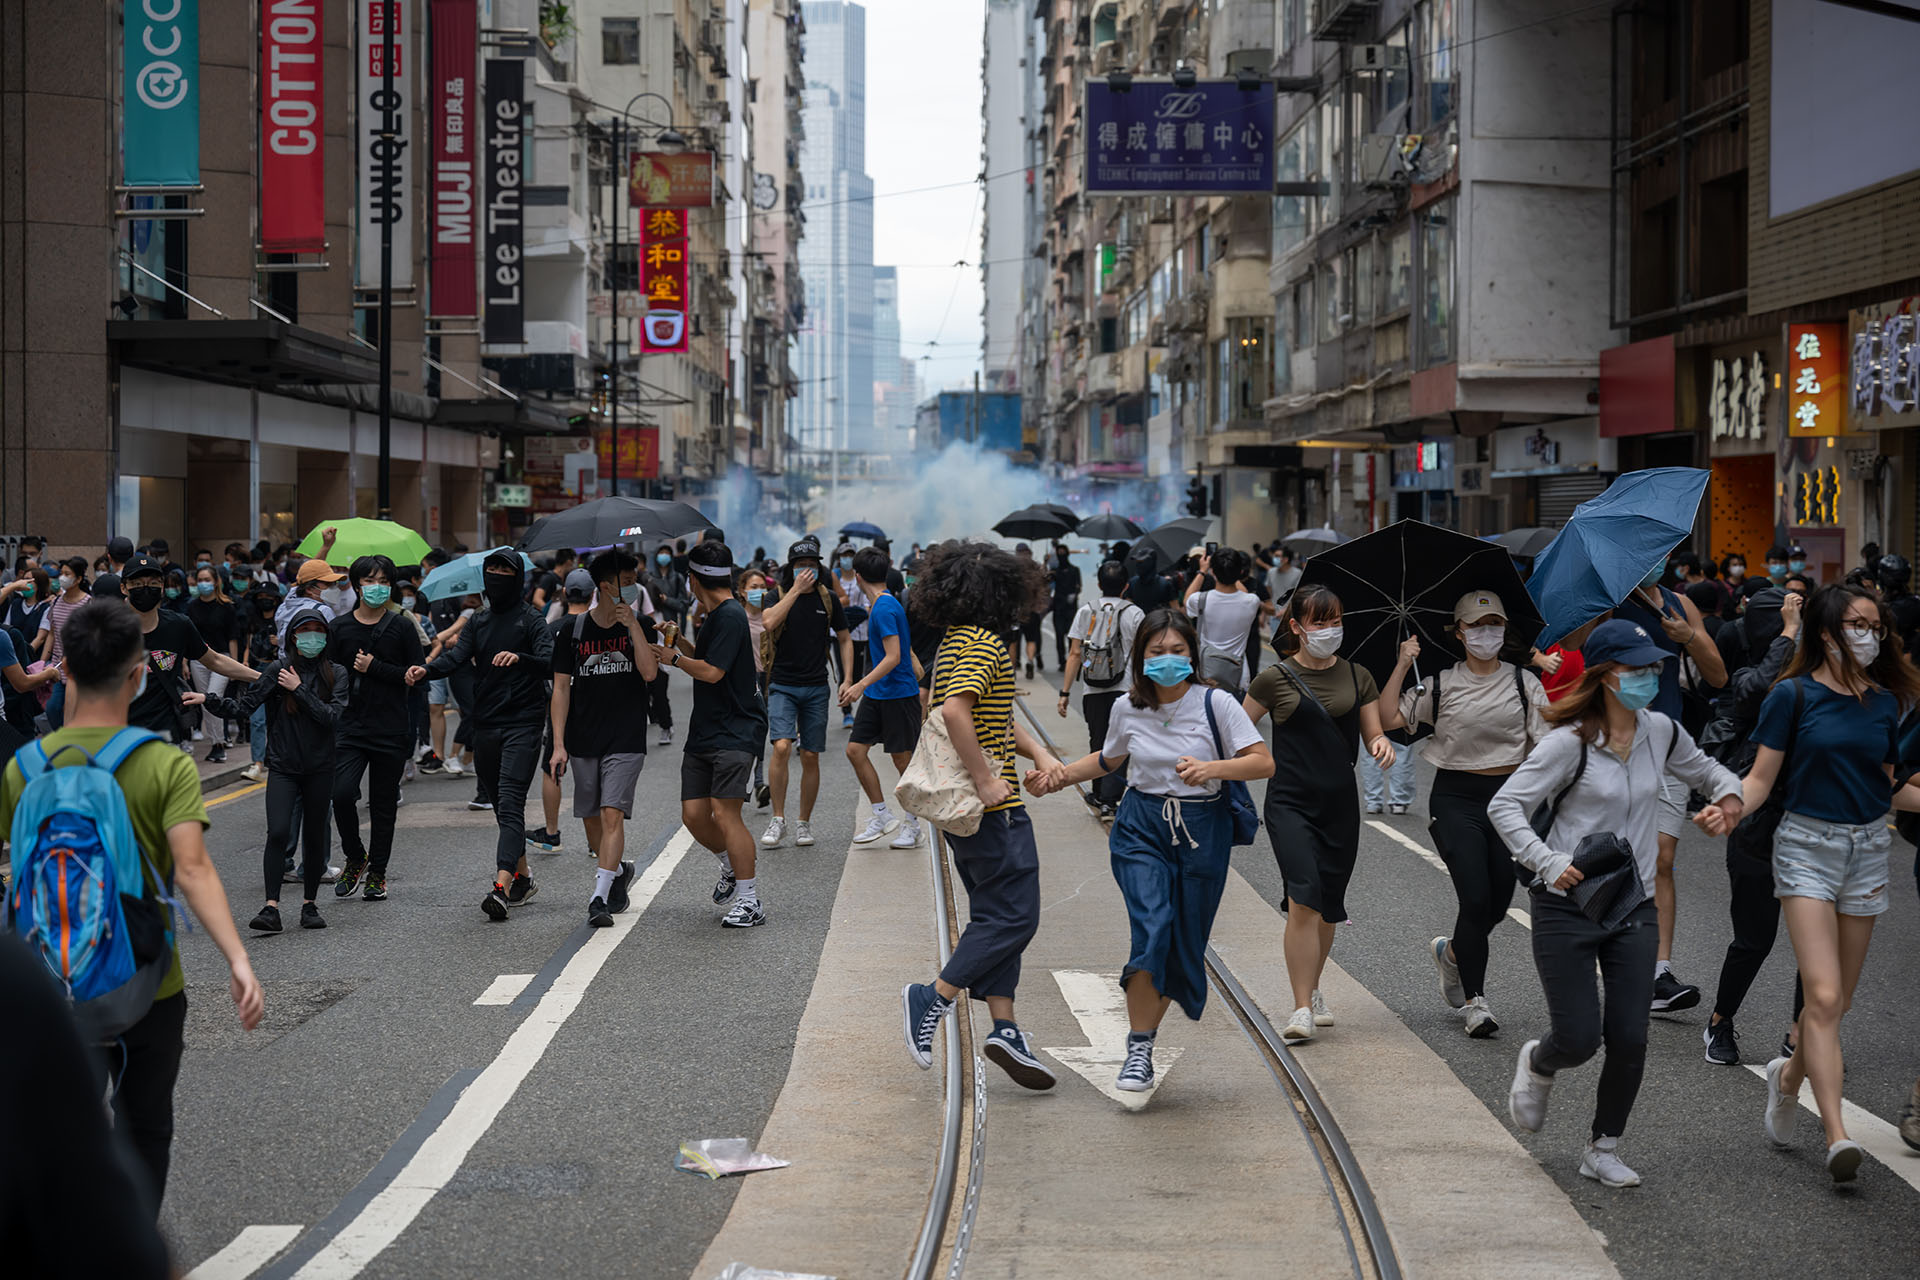 May 2020 protest in Hong Kong against National Security Law 